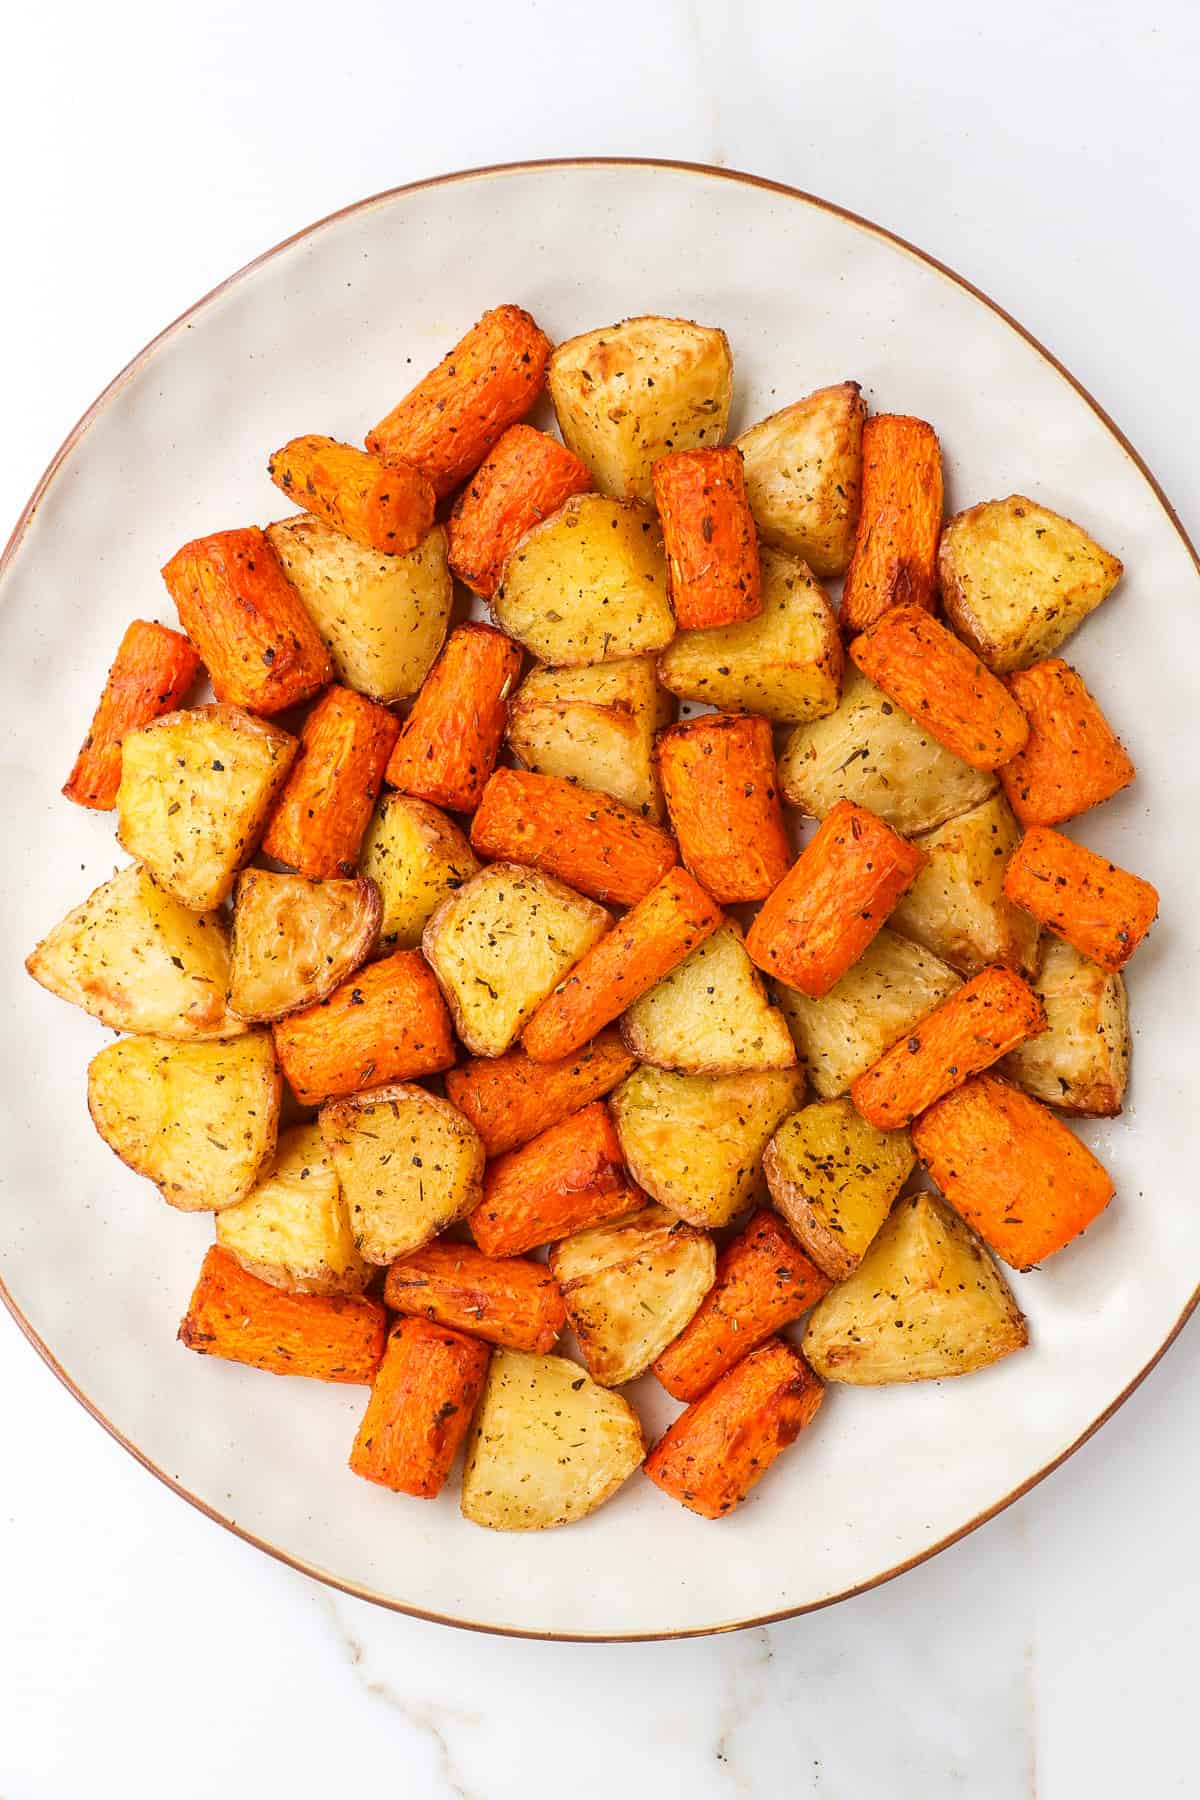 Air fryer potatoes and carrots on a plate.